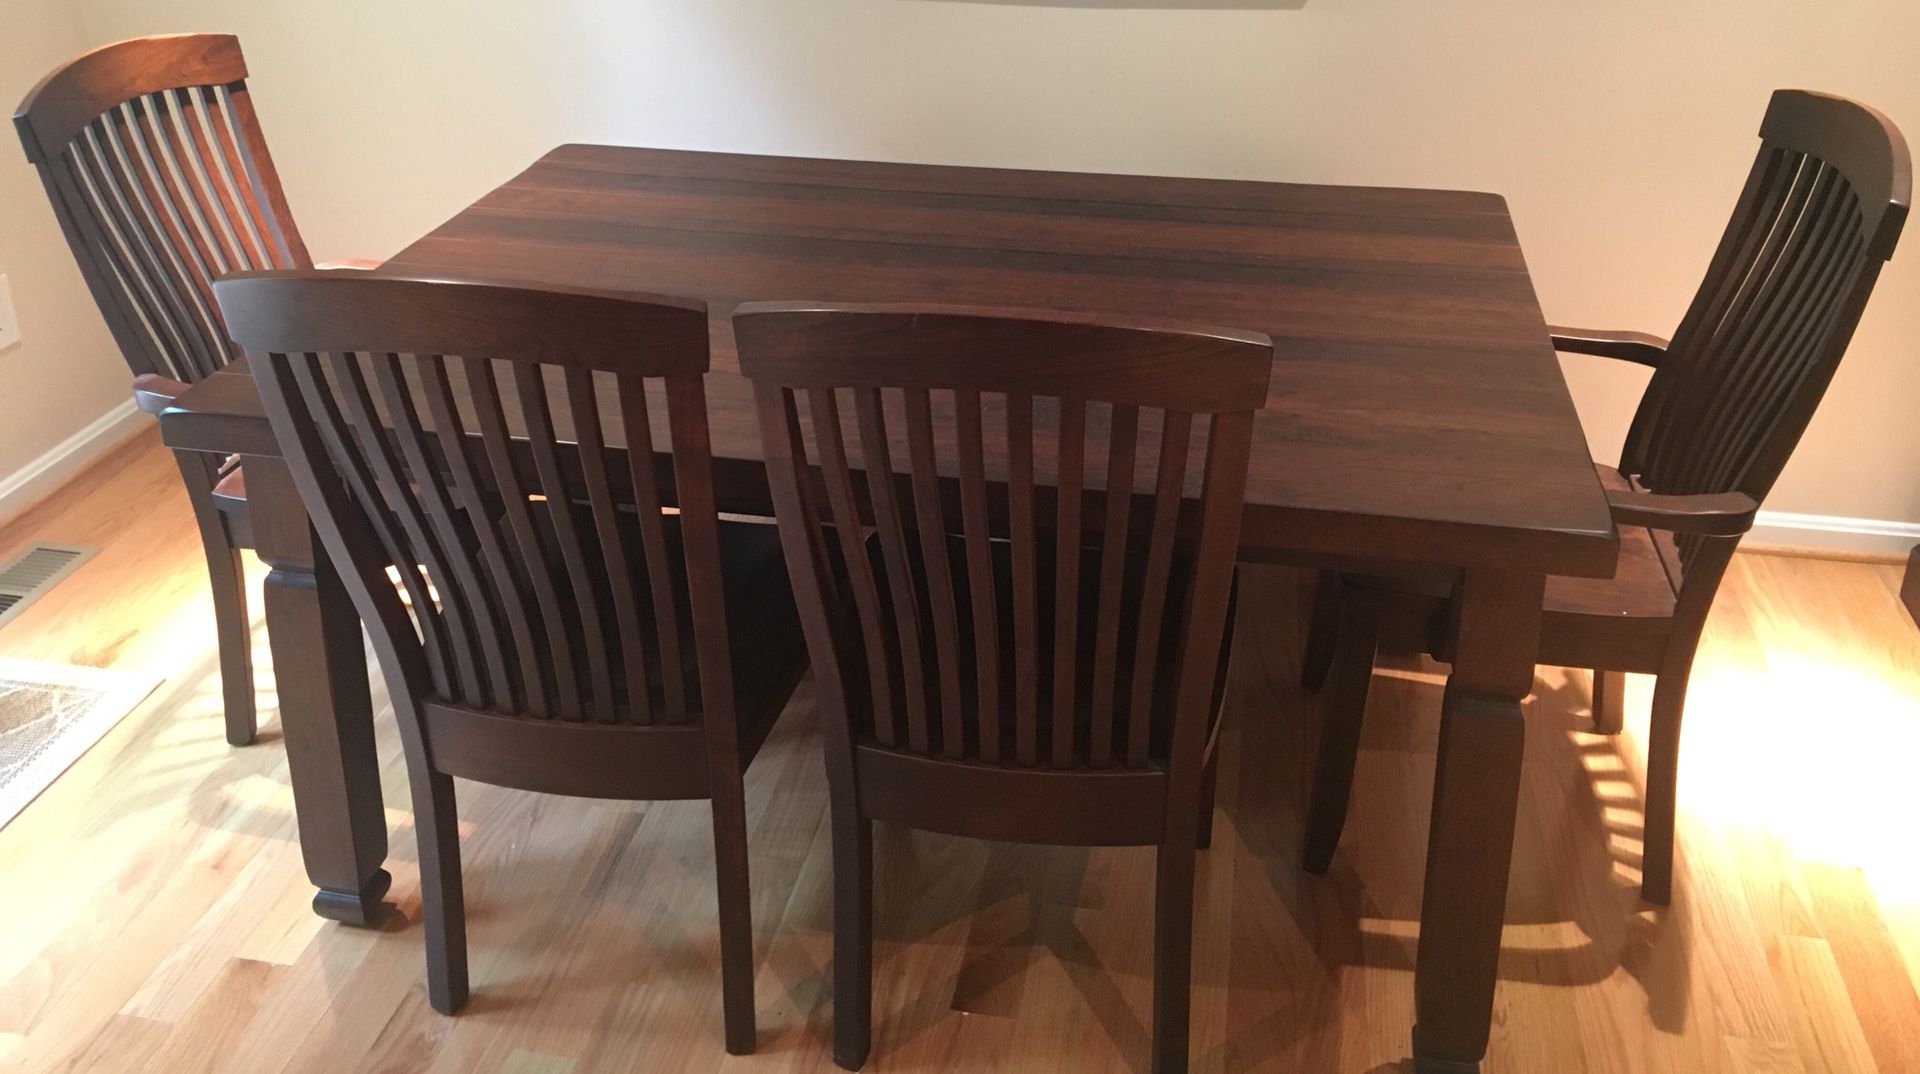 Amish dining room set: table, 2 arm chairs, 2 side chairs, one 2-person bench